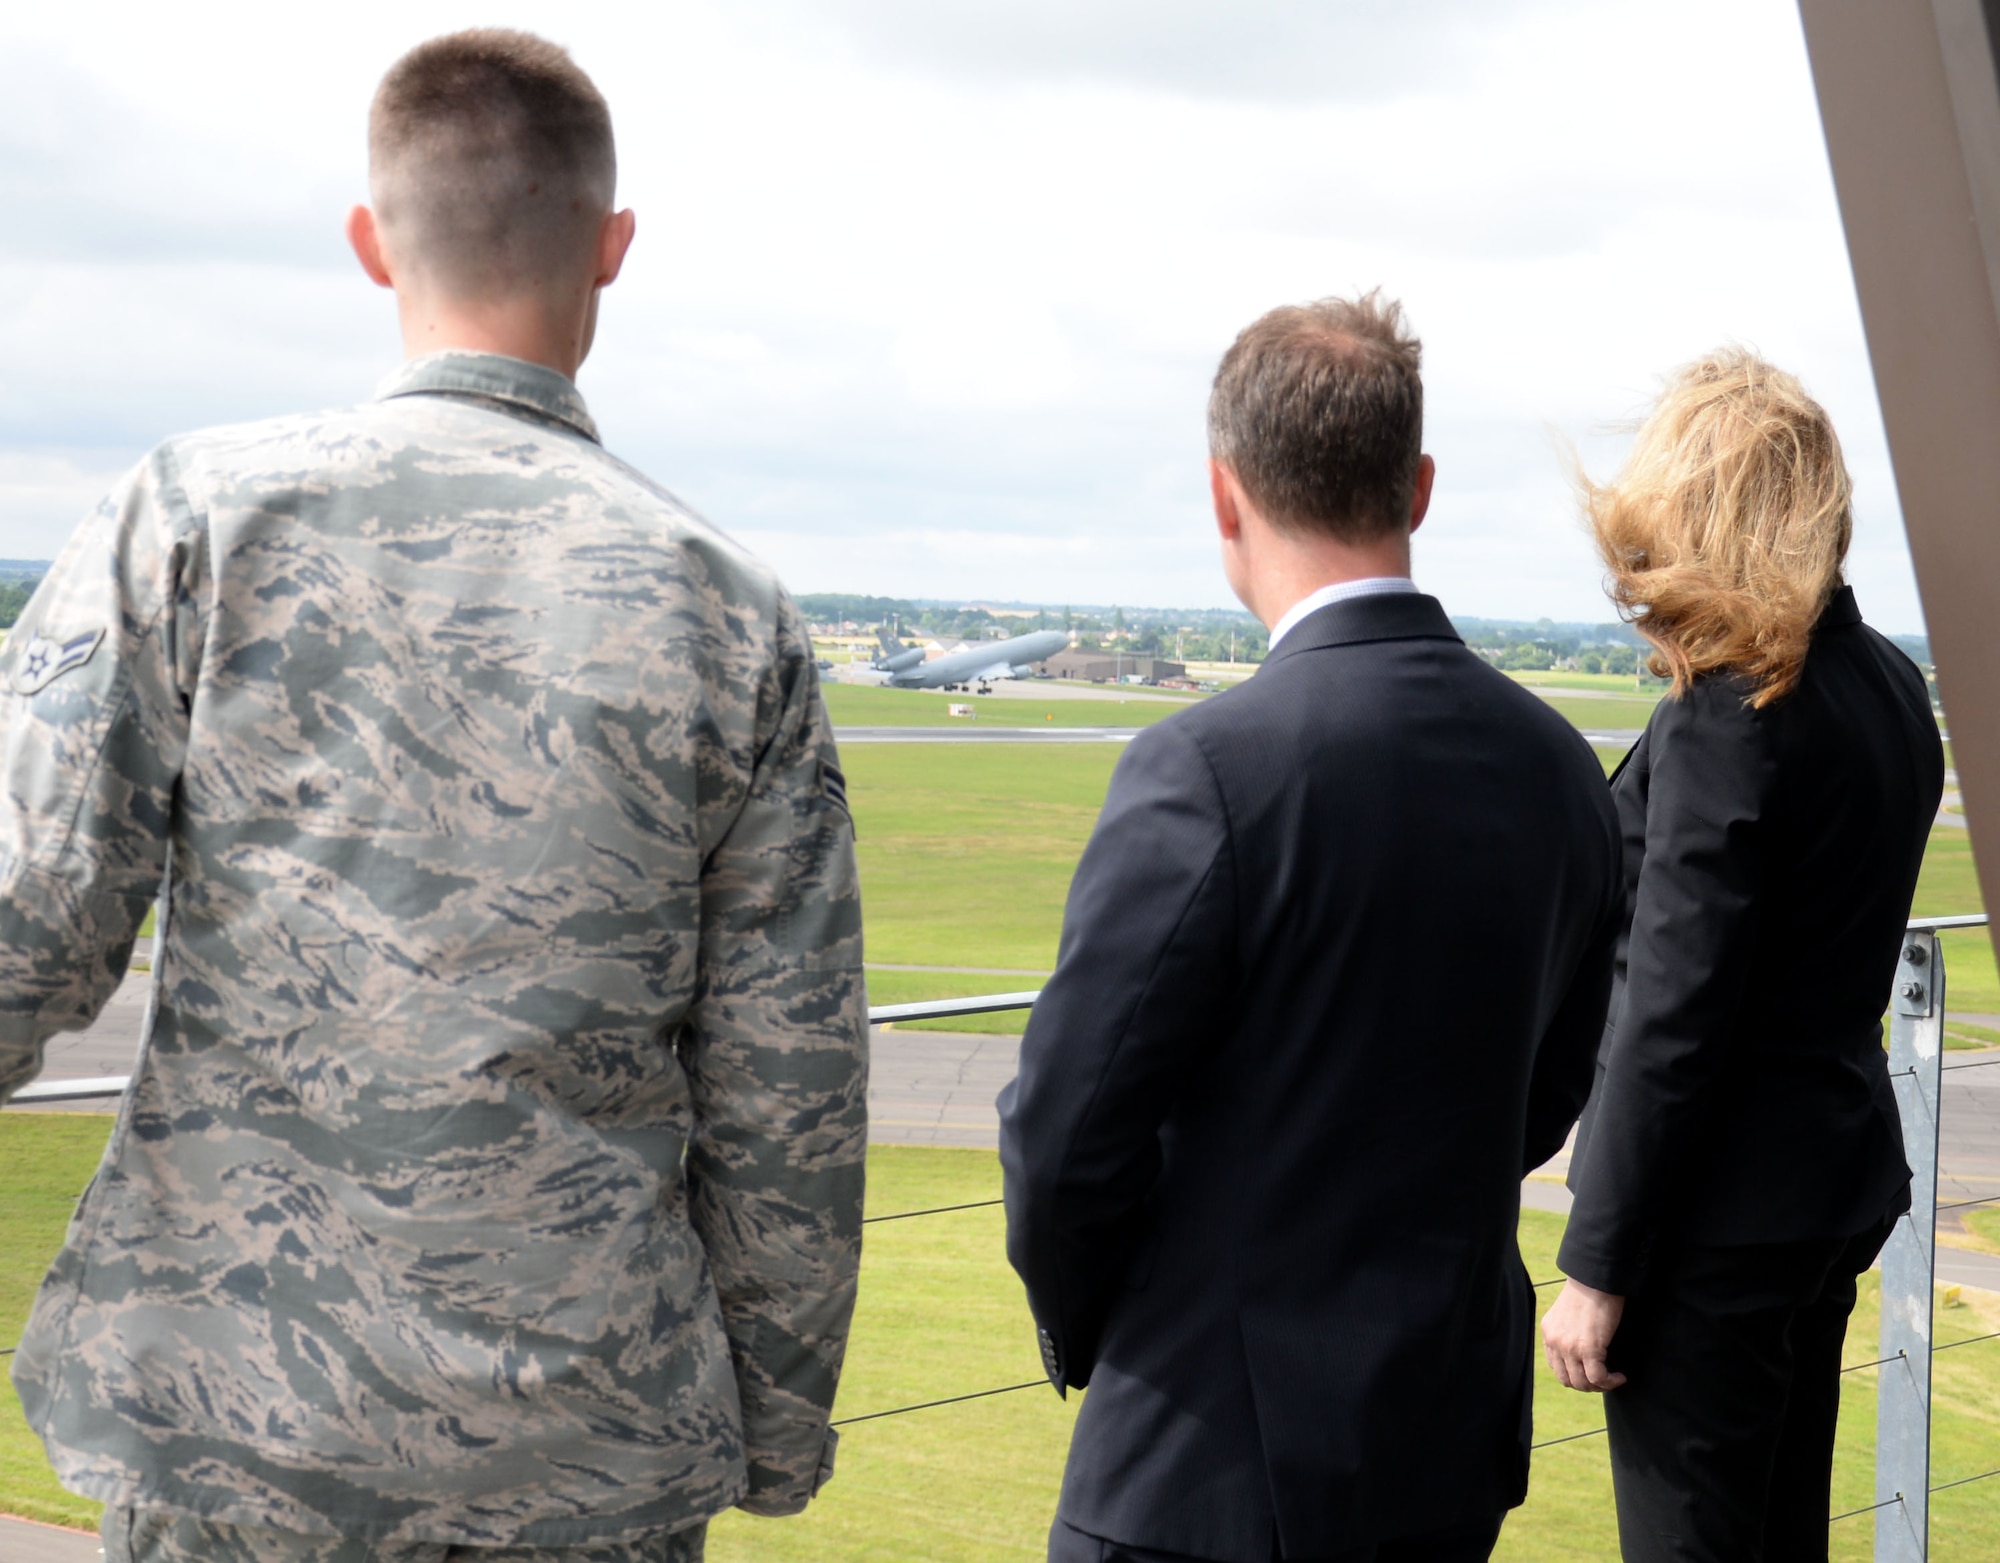 U.S. Air Force Airman 1st Class Sheldon Jones, left, 100th Operations Support Squadron air traffic controller, shows Amanda Simpson, right, Deputy Assistant Secretary of Defense for Operational Energy, and Robert Warshel, center, Director of Operations, Operational Energy Plans and Programs, the view from the Air Traffic Control Tower as a KC-135 Stratotanker departs July 29, 2016, on RAF Mildenhall, England. Simpson and Warshel visited many areas of base including the 100th Logistics Readiness Squadron Fuels flight, the 100th Force Support Squadron Dining Facility, the 100th Maintenance Squadron and the 100th Civil Engineer Squadron. (U.S. Air Force photo by Gina Randall)